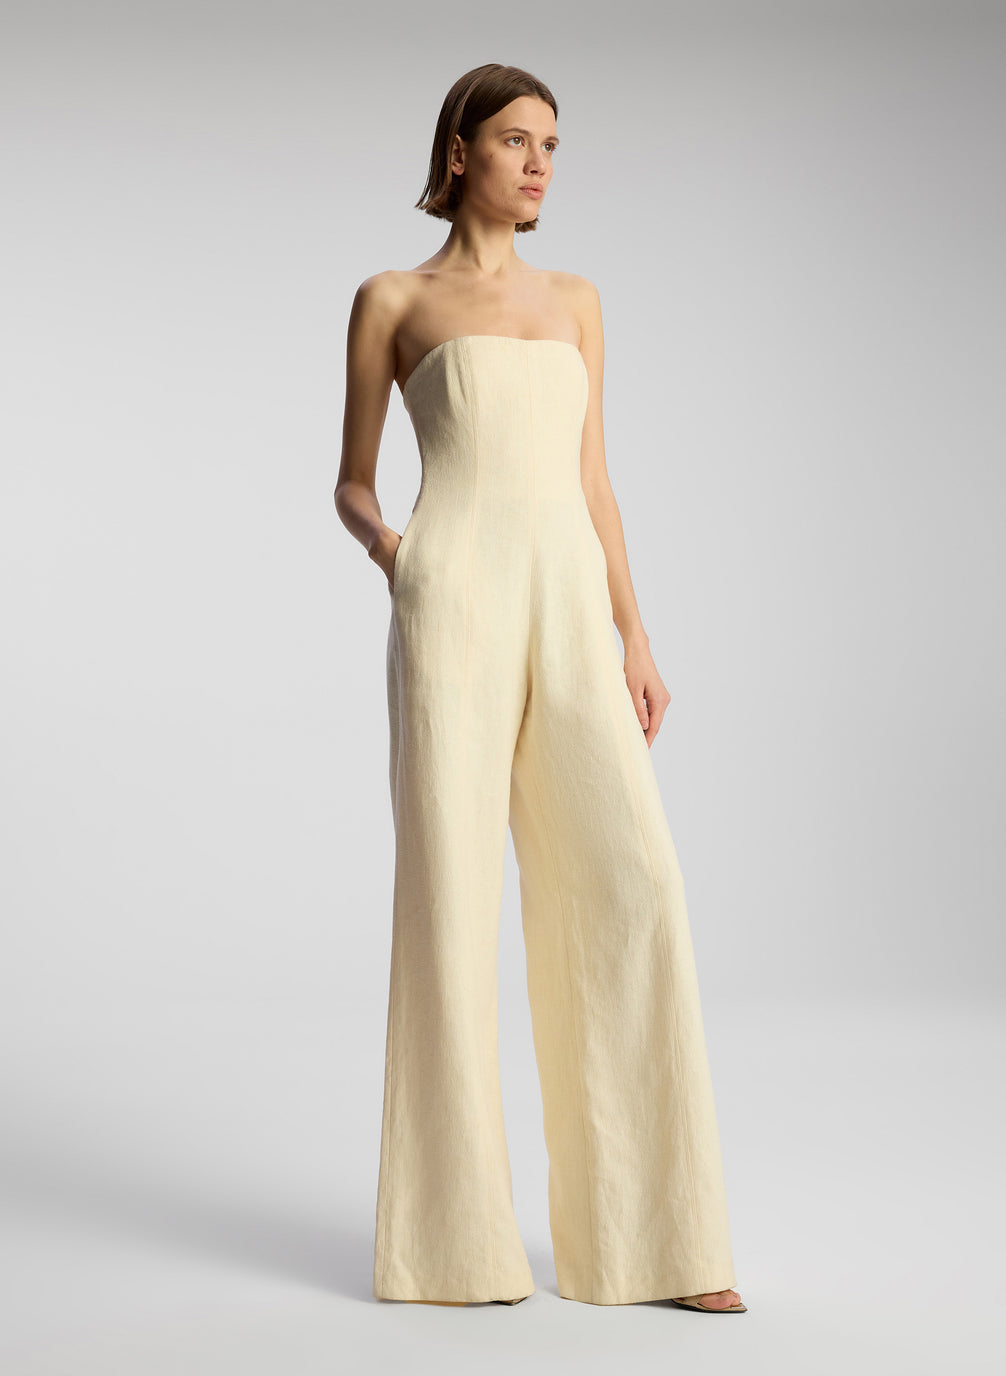 side view of woman wearing cream strapless jumpsuit